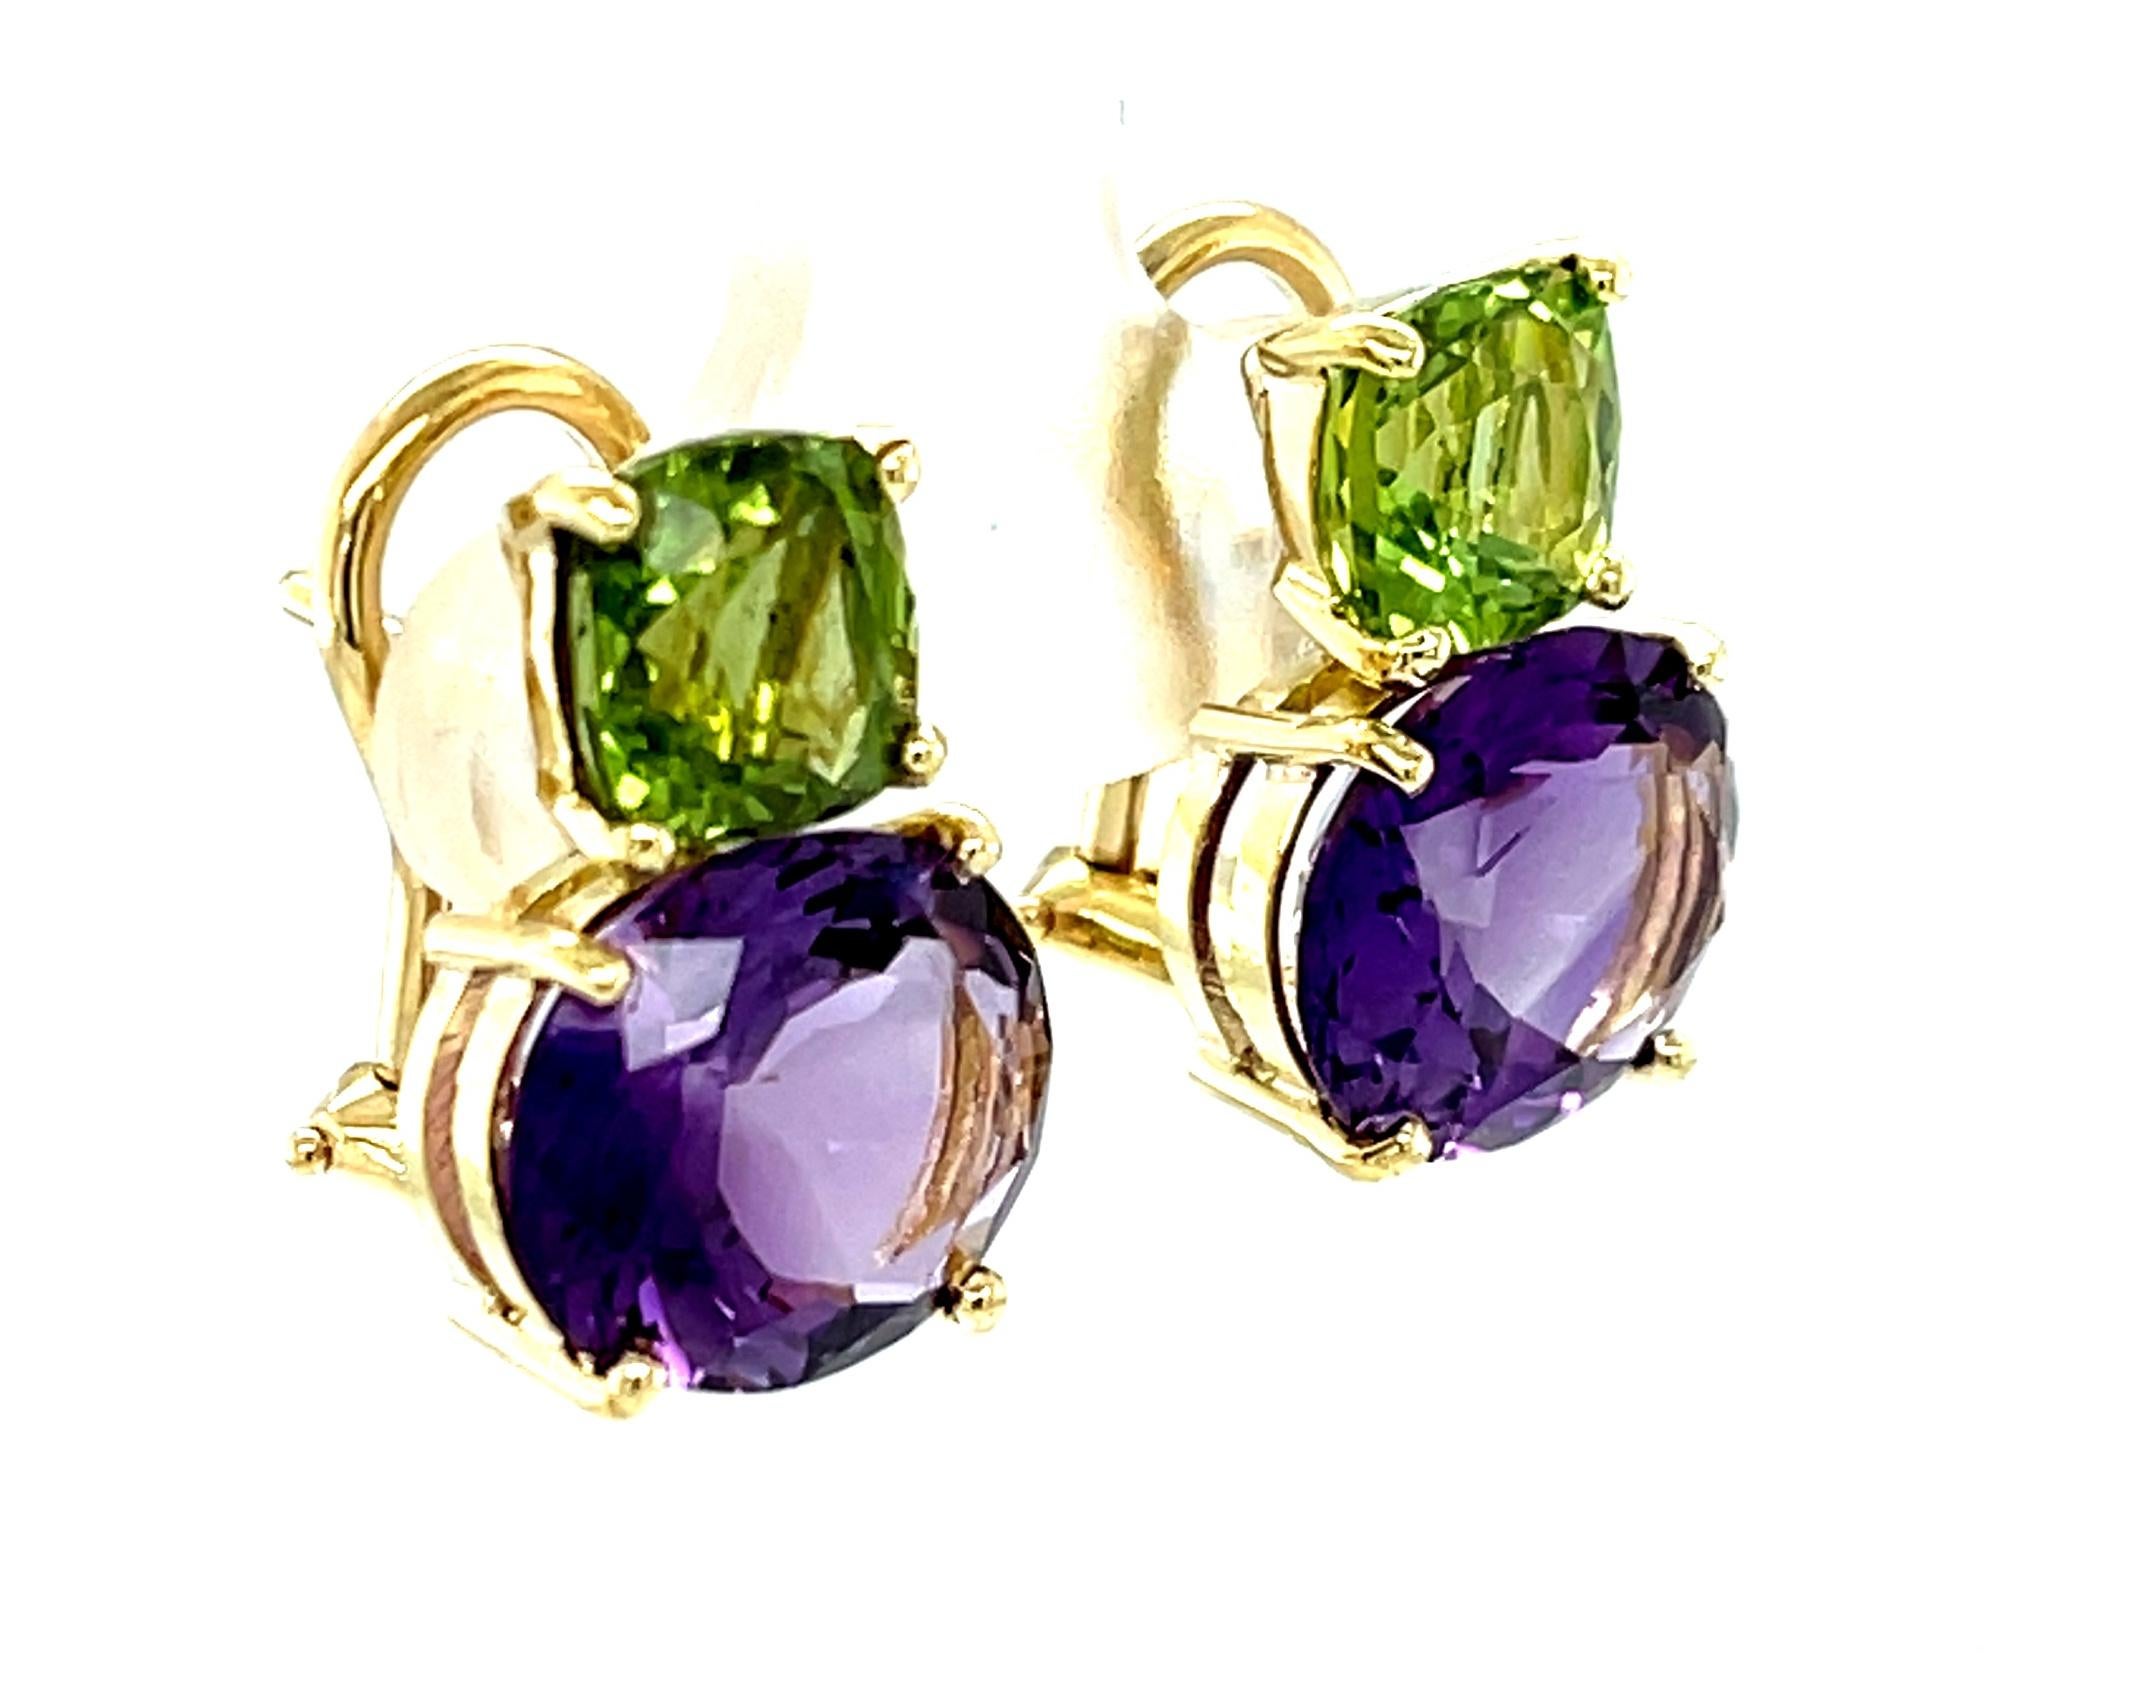 These beautiful color-blocked earrings feature a gorgeous pairing of apple green peridots and bright purple amethysts set in elegant 18k yellow gold baskets. The gemstones are so lively and brilliant, with colors that complement each other